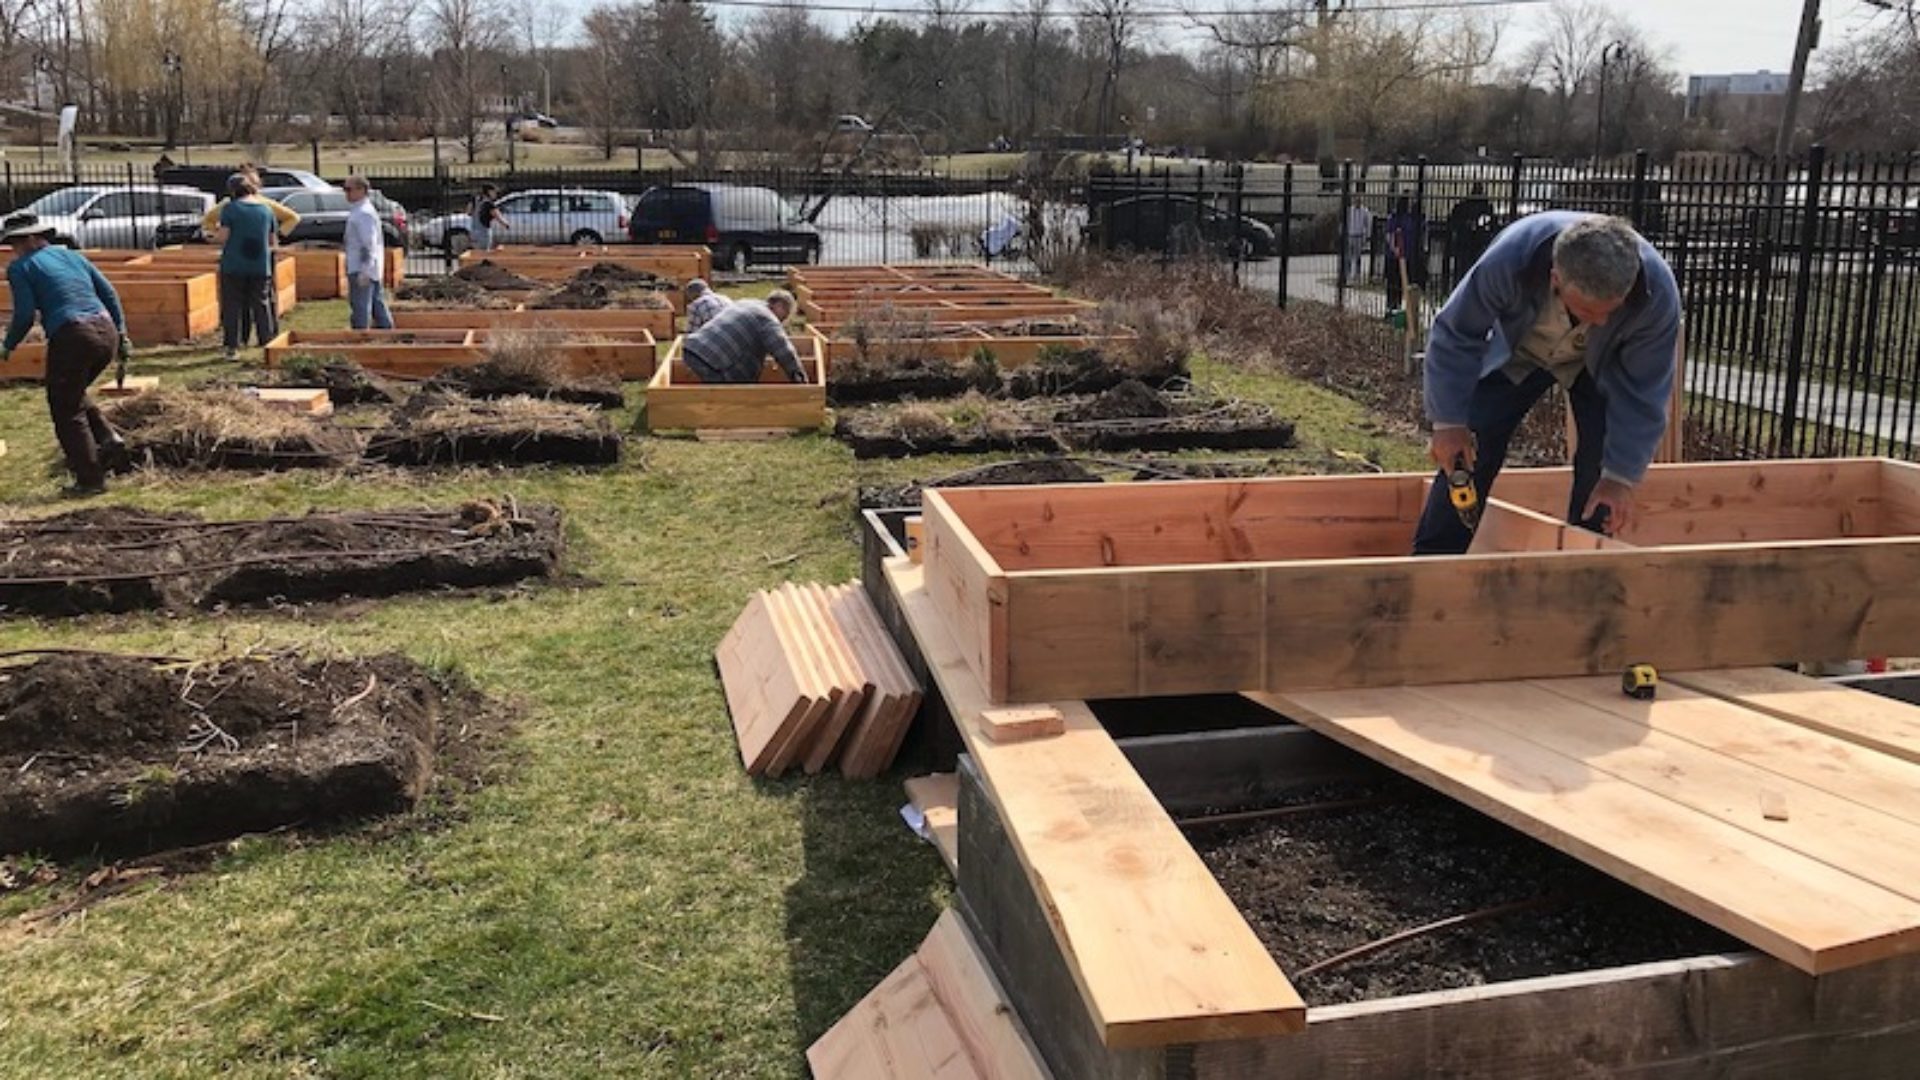 Sheet Metal Union Pitches in to Build New Beds for Downtown Community Garden